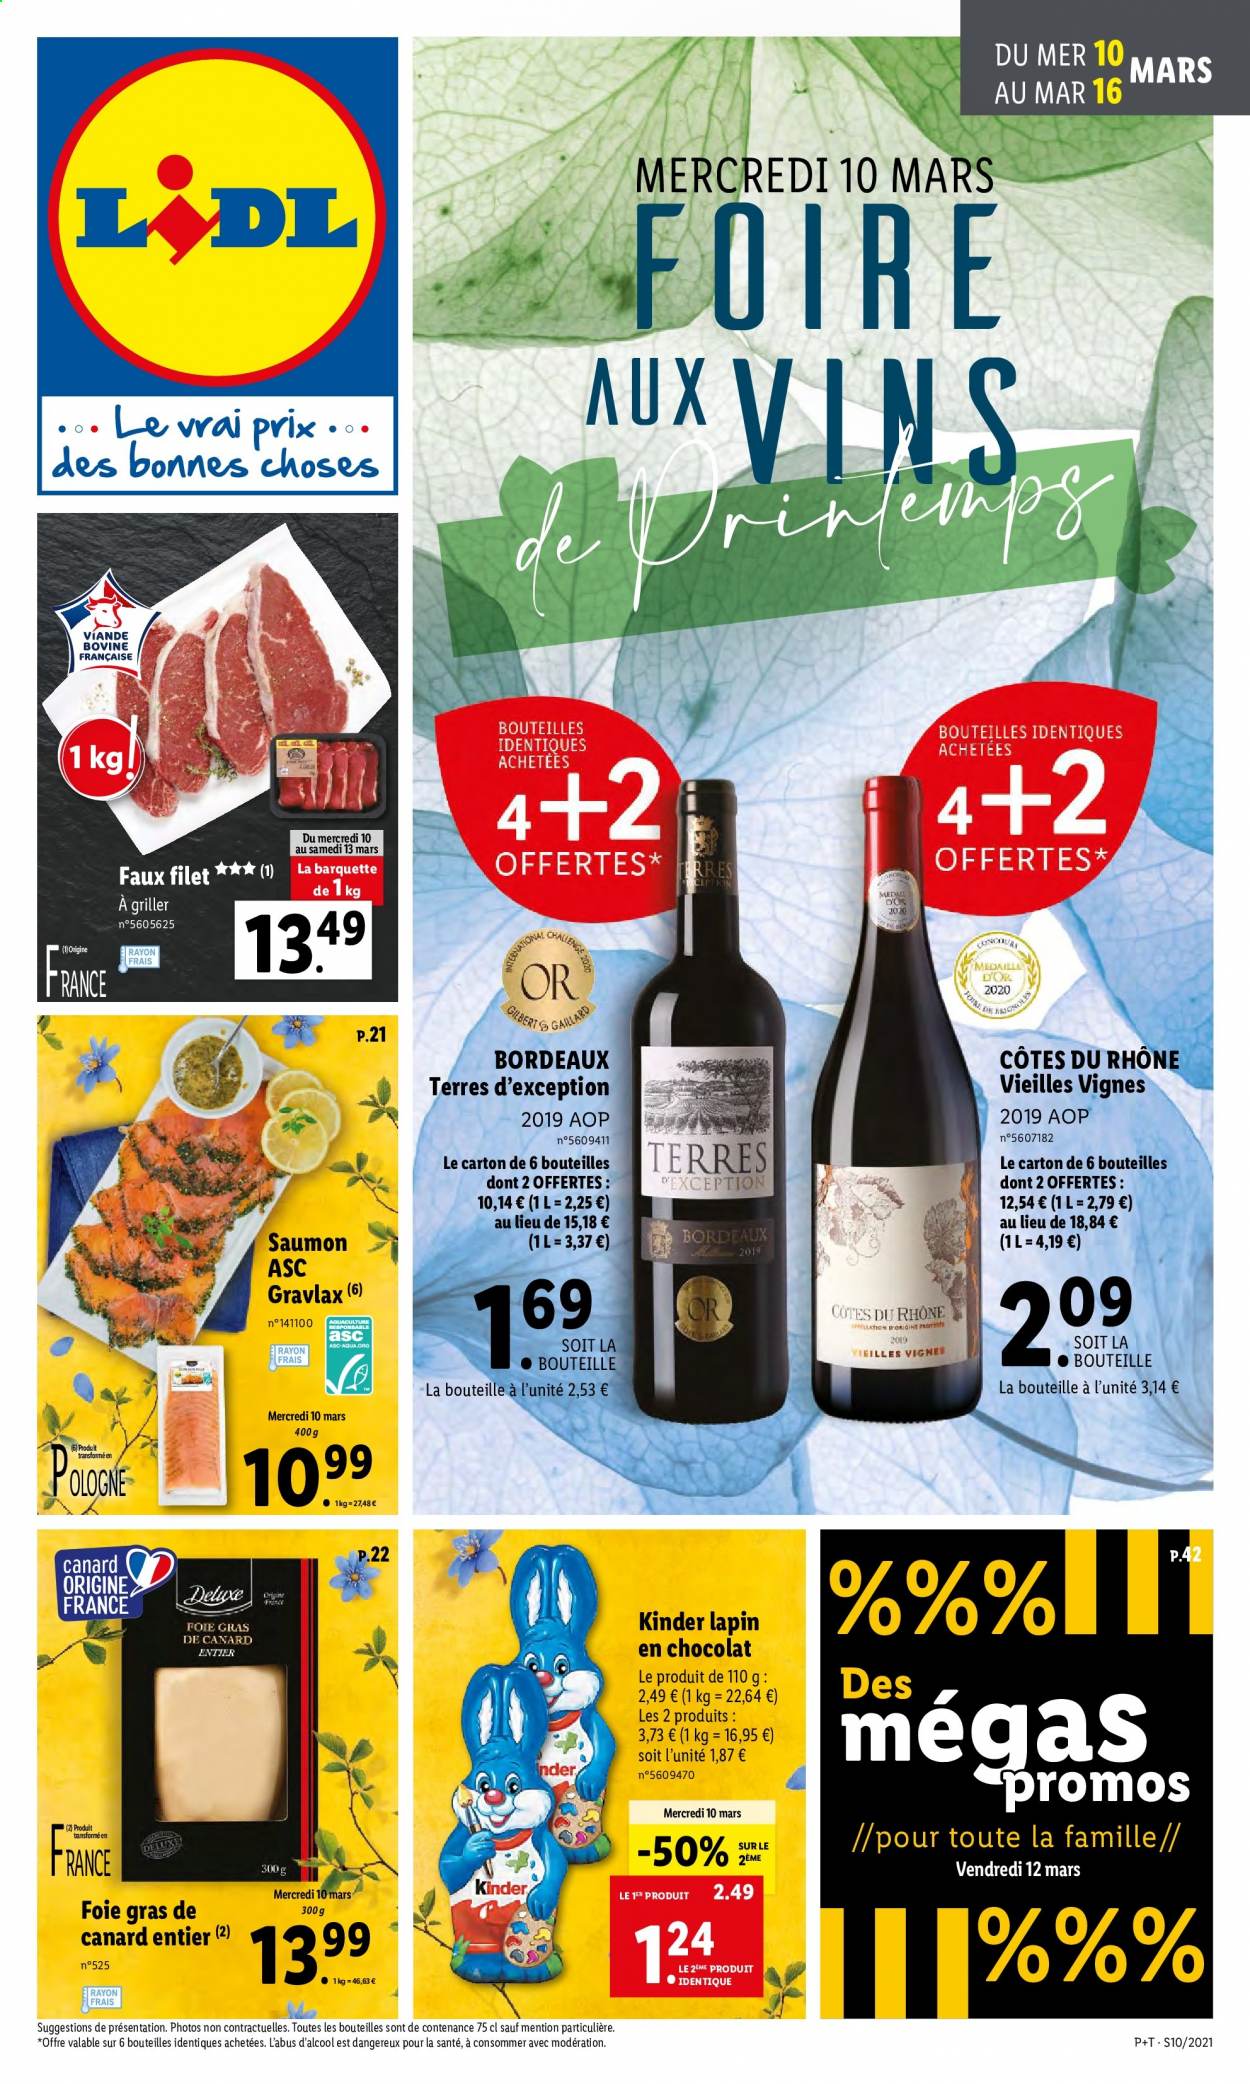 Catalogue Lidl - 10.03.2021 - 16.03.2021. Page 1.